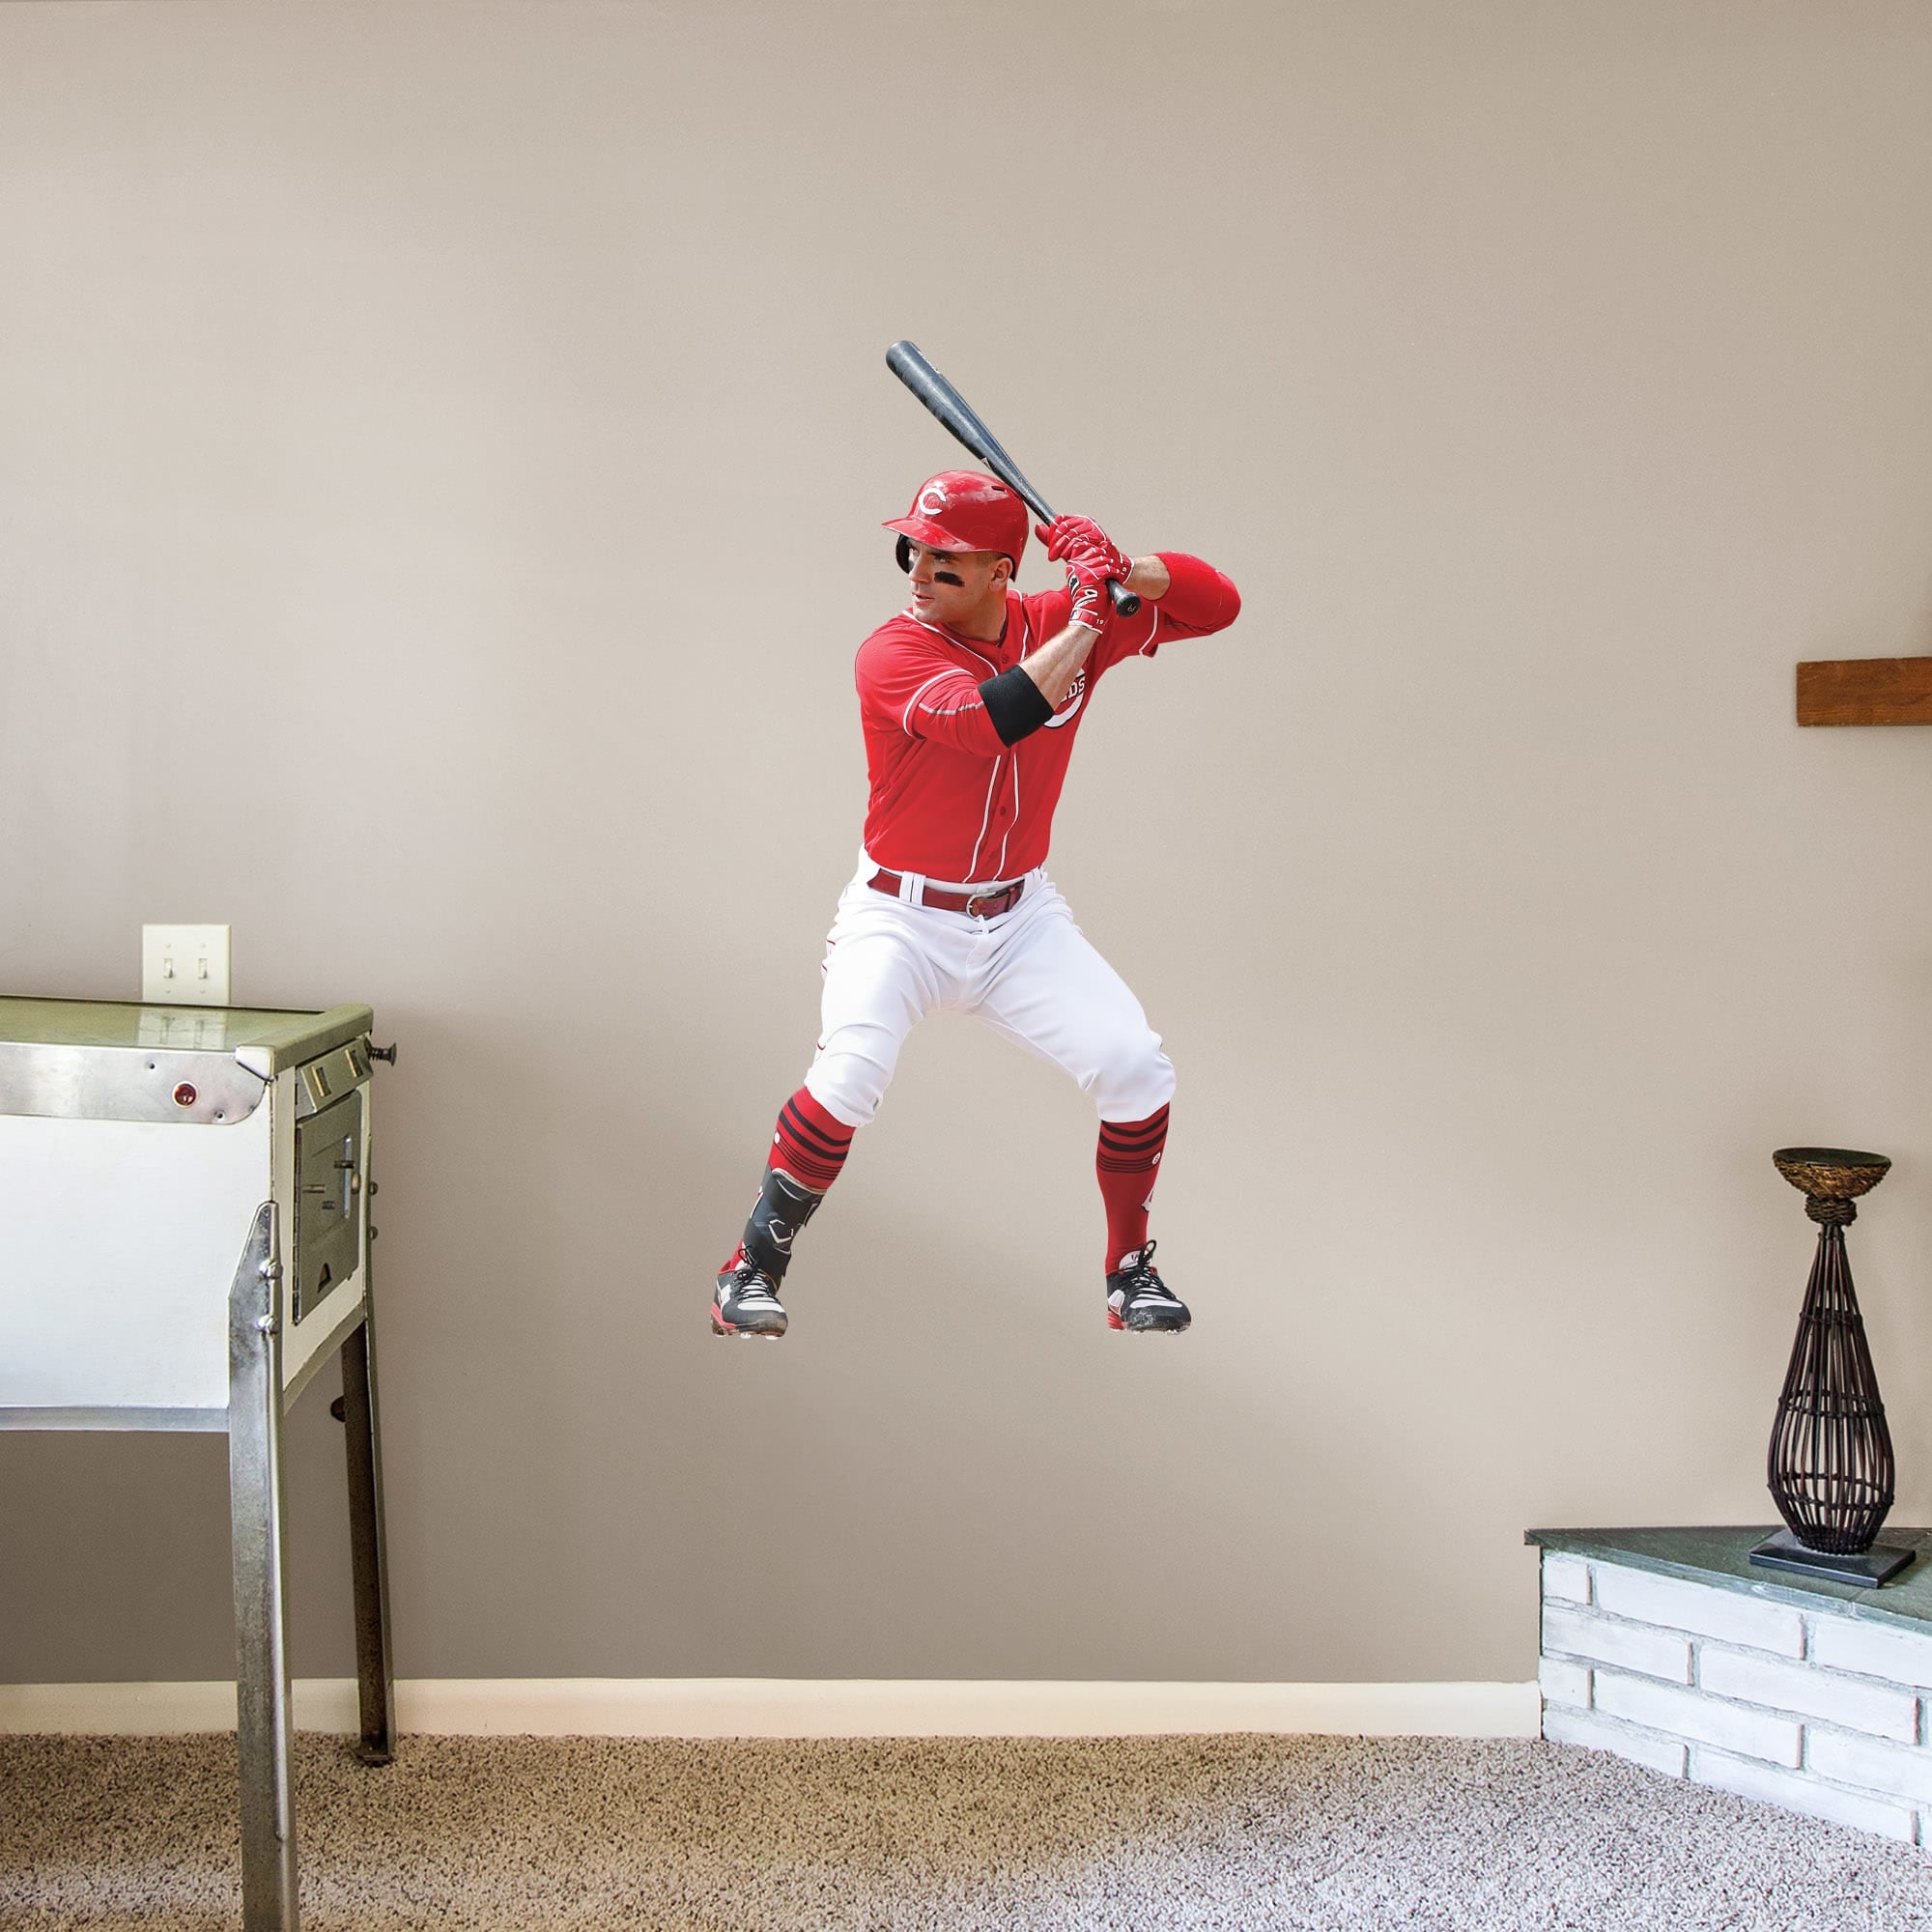 Joey Votto for Cincinnati Reds - Officially Licensed MLB Removable Wall Decal Giant Athlete + 2 Decals (27"W x 51"H) by Fathead